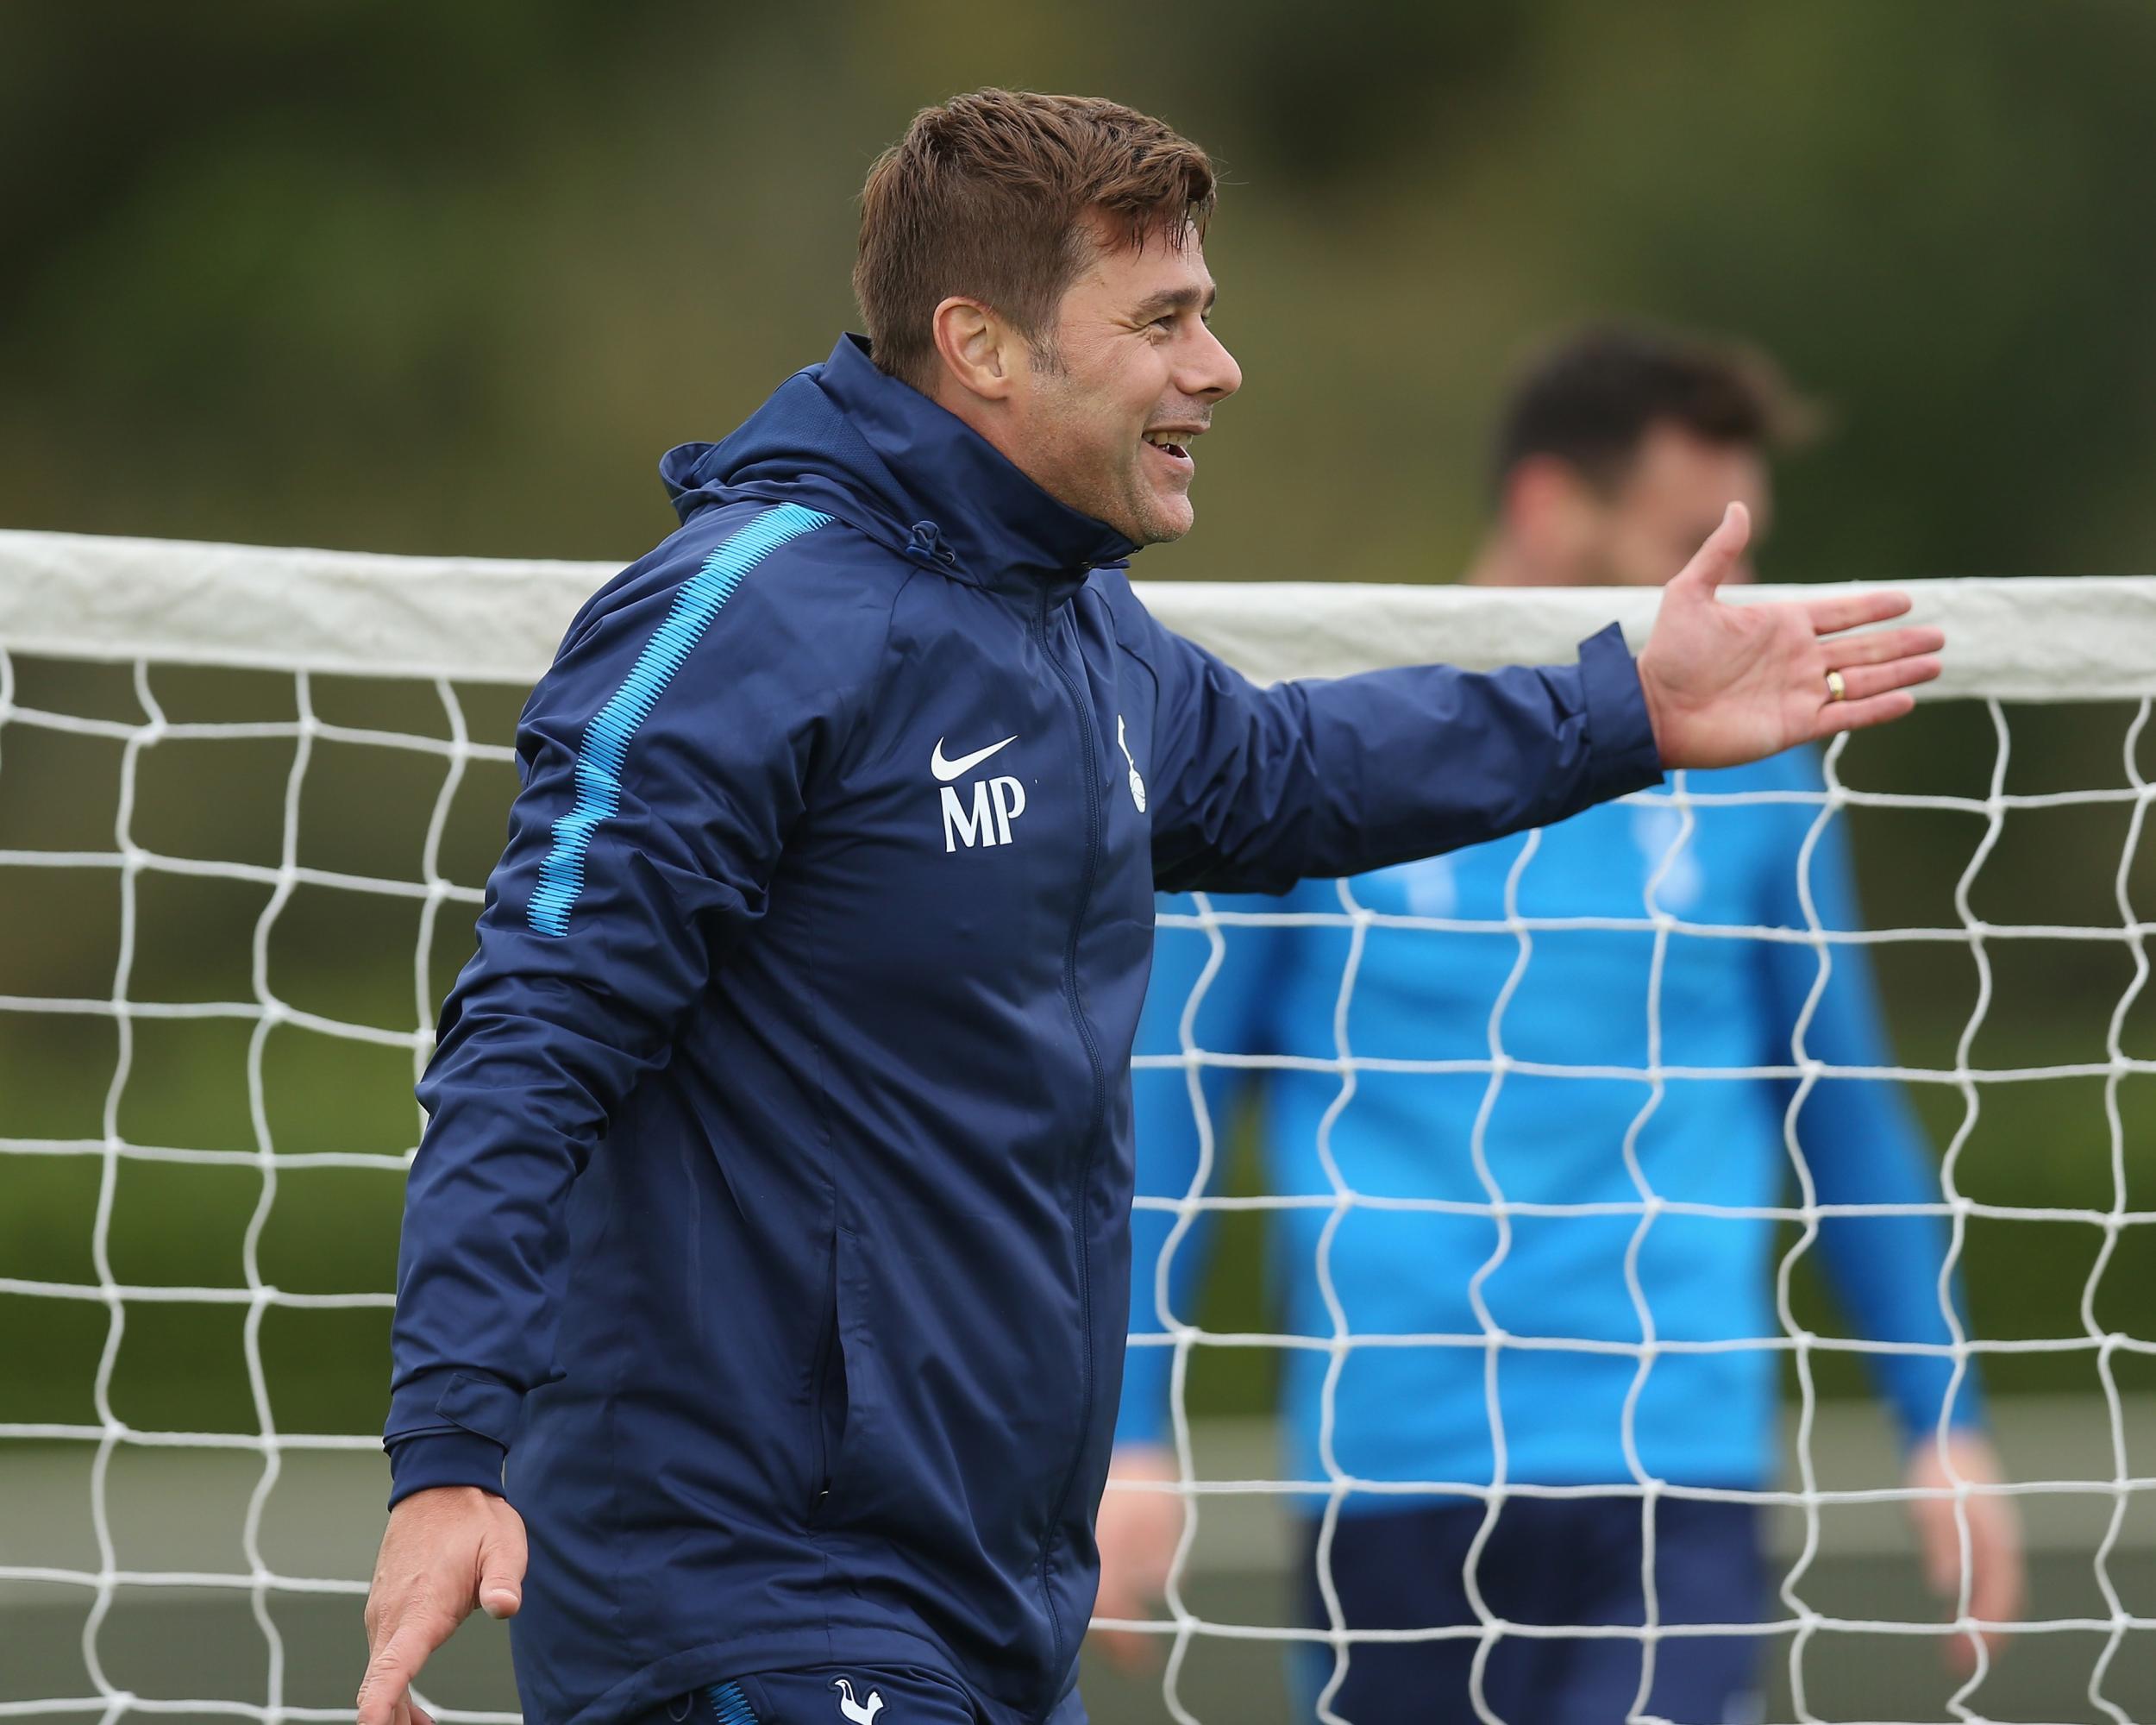 Pochettino wants to work on strengthening the bond between his players